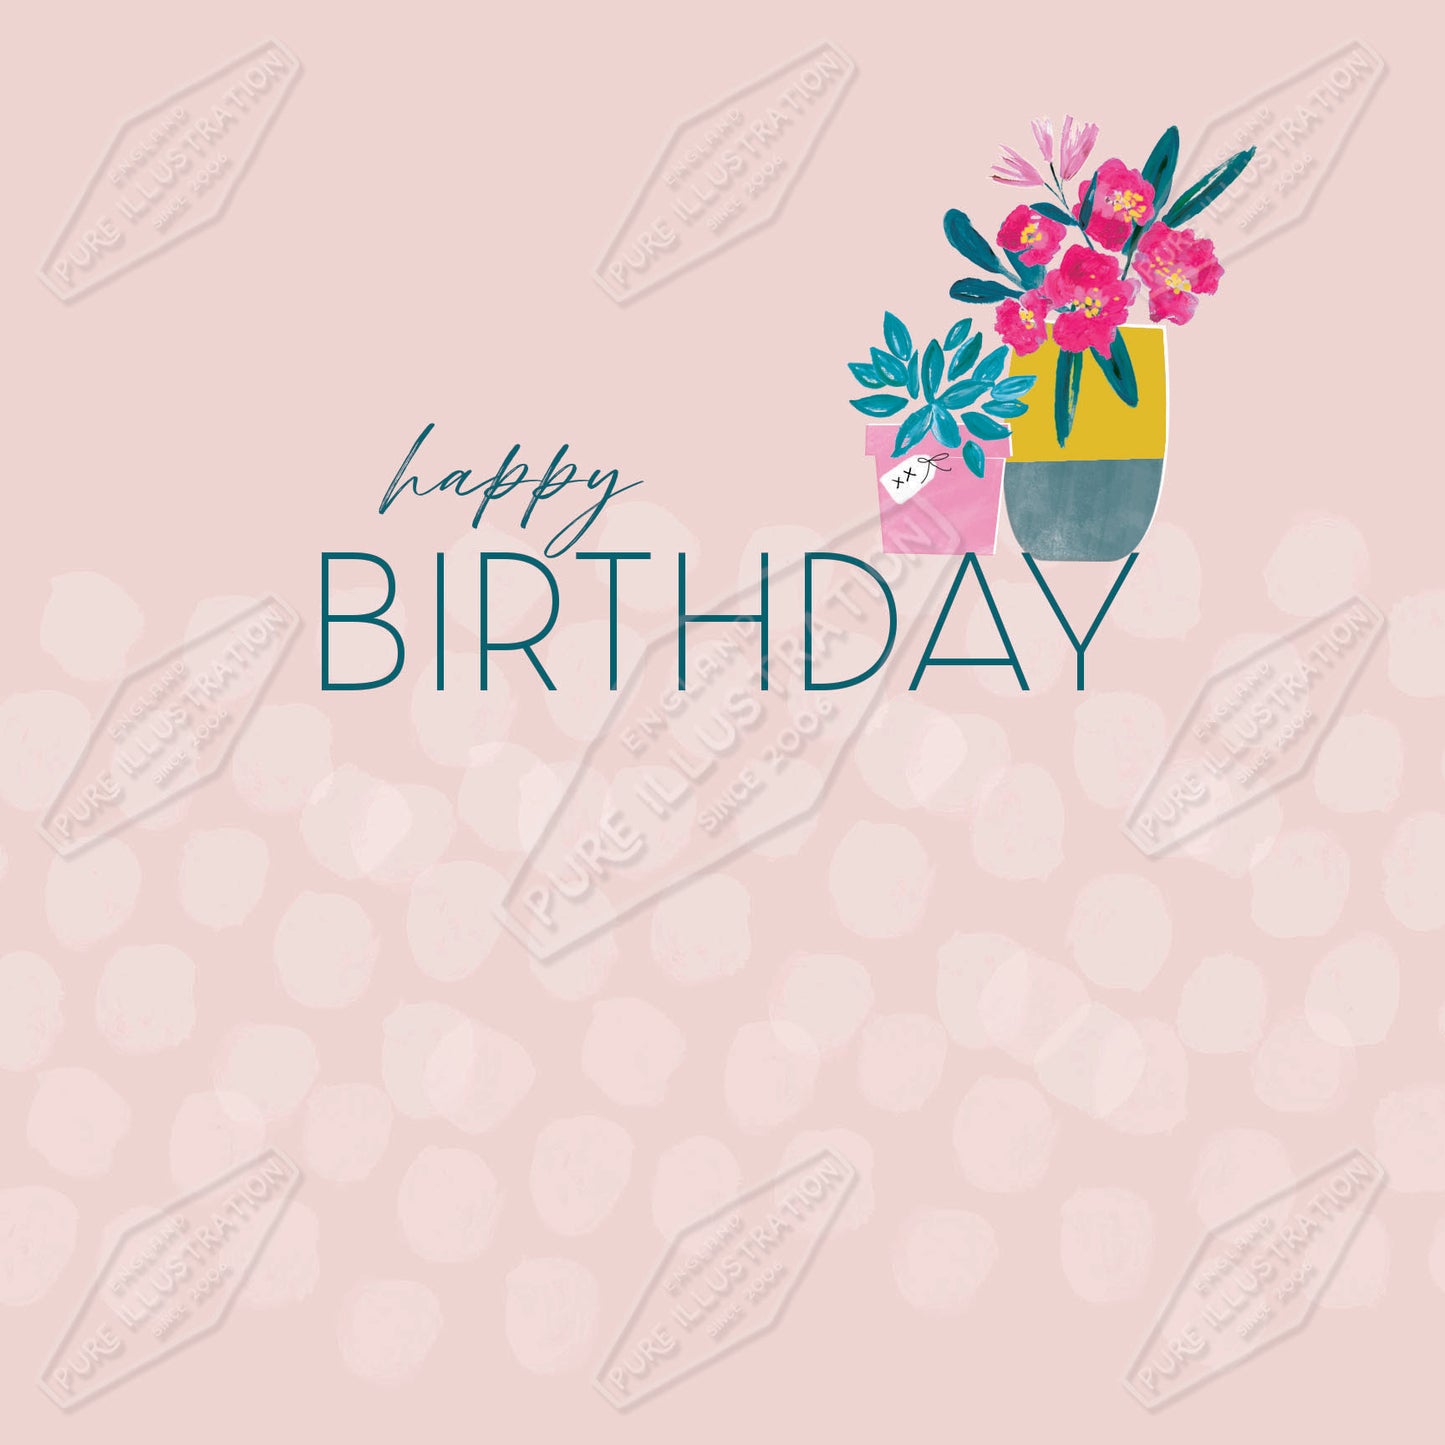 00035822SLA- Sarah Lake is represented by Pure Art Licensing Agency - Birthday Greeting Card Design